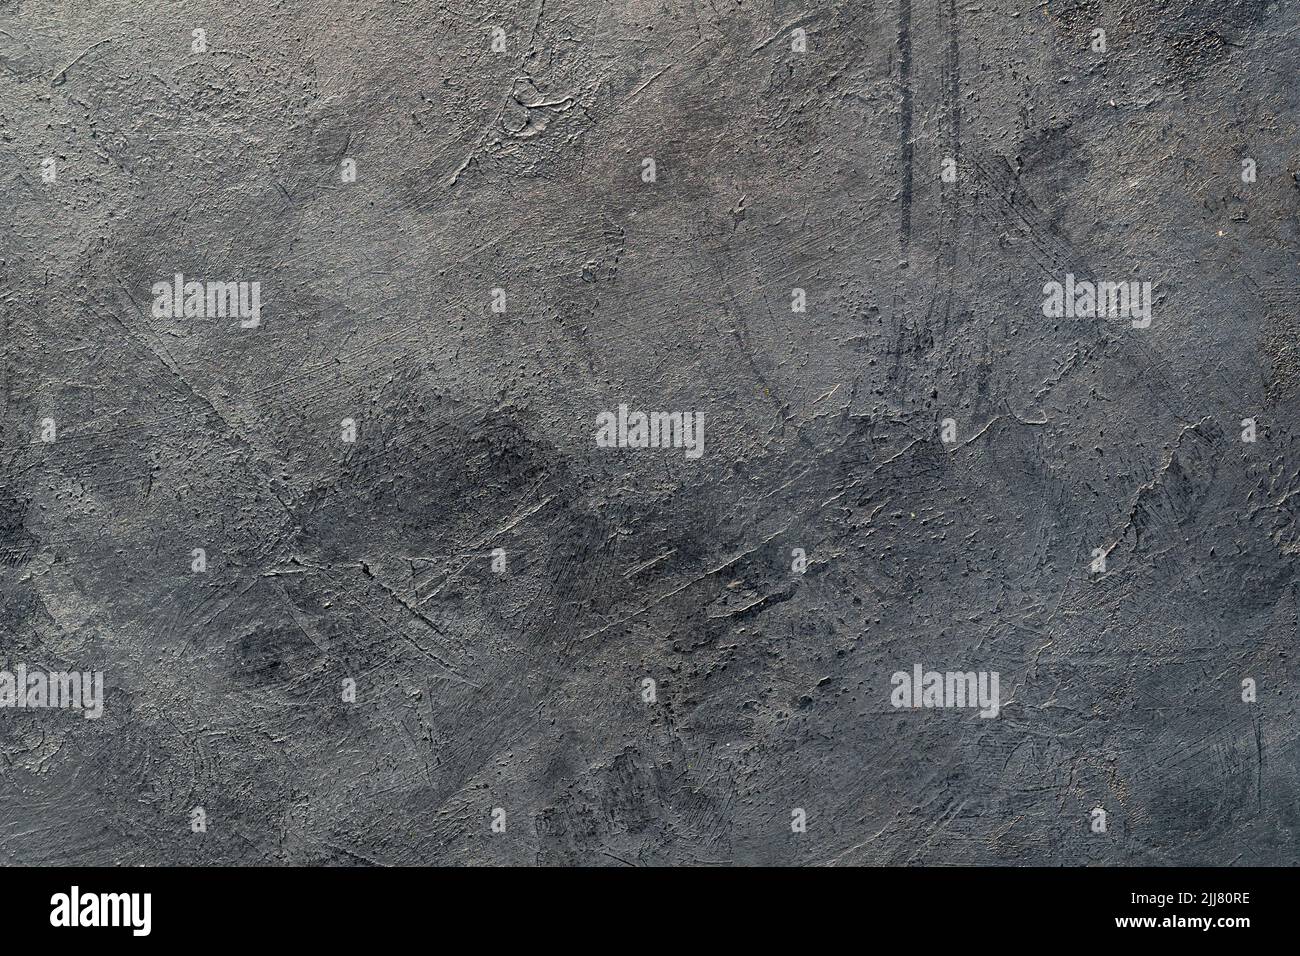 abstract black background scratch dust texture Stock Photo